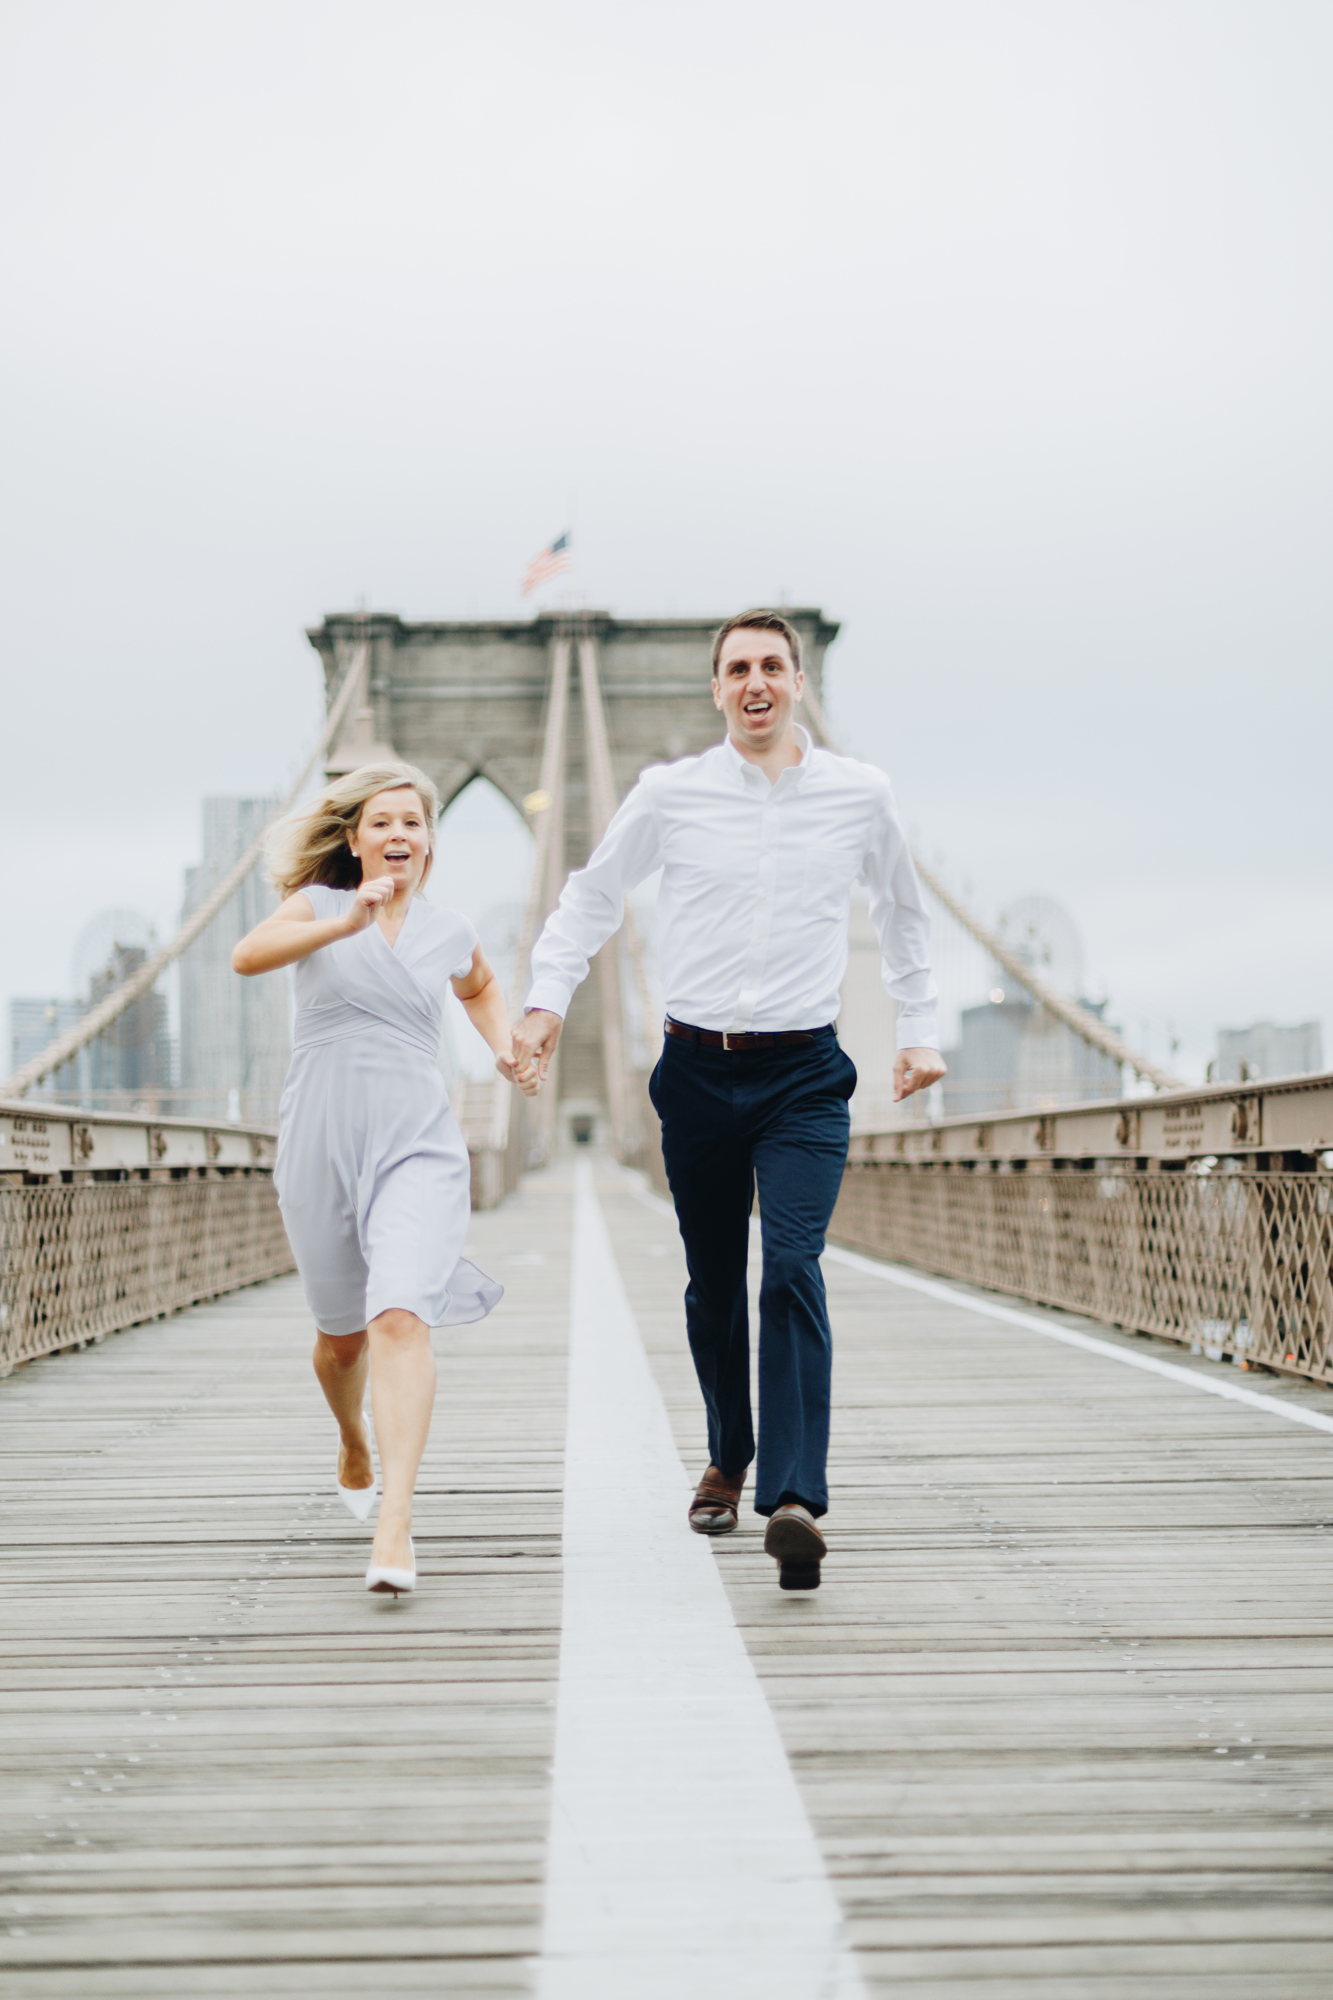 Candid Brooklyn Bridge Park Engagement Photos on a Cloudy Day in New York